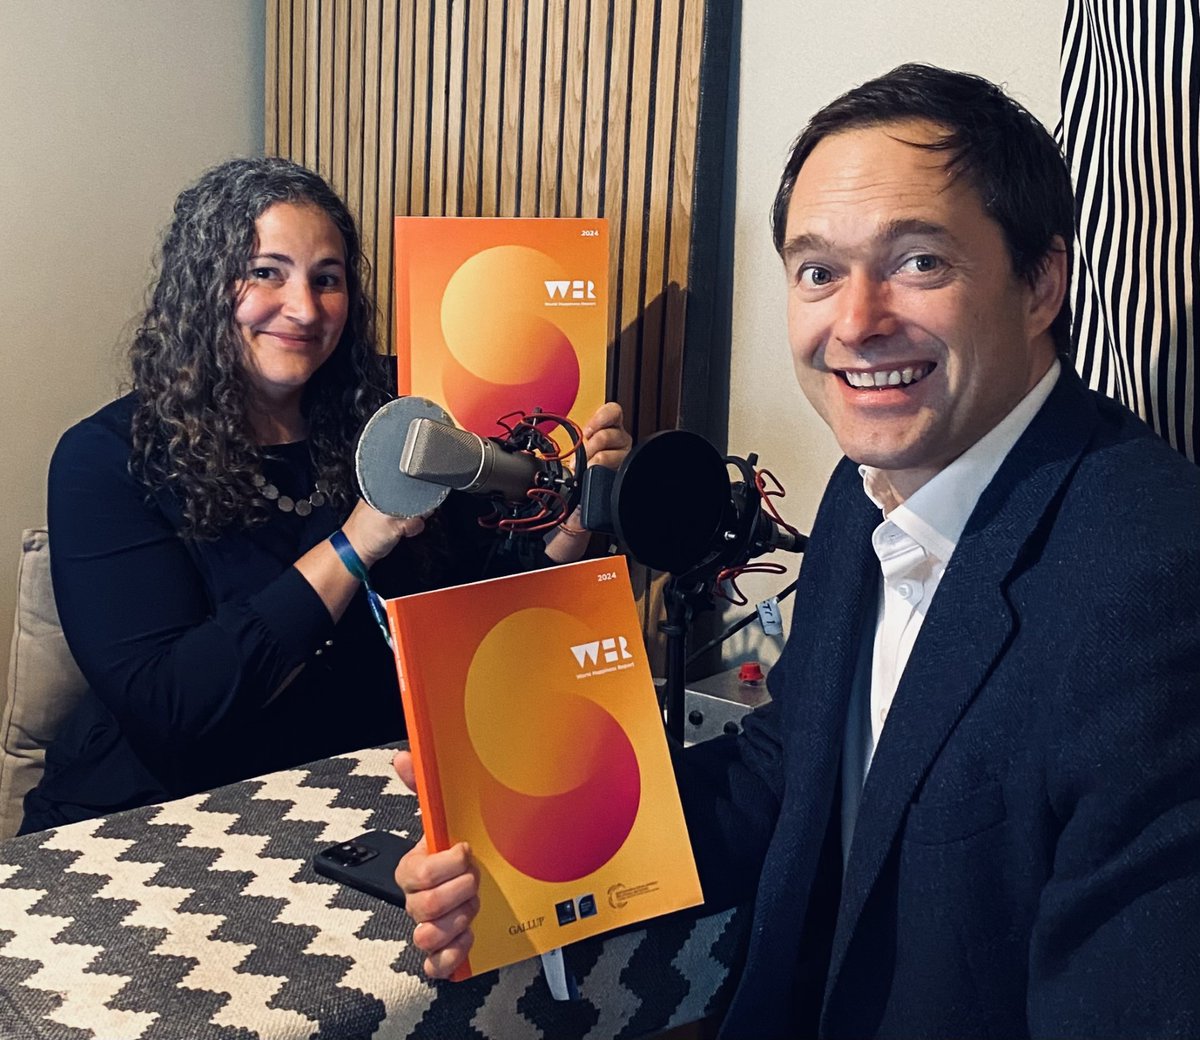 Happy International Day of Happiness! Super excited to celebrate in London w/@jedeneve who shared a copy of the #WorldHappinessReport @HappinessRpt released today. Check out our special Happiness Lab podcast series about the report which begins today: podcasts.apple.com/us/podcast/hap…